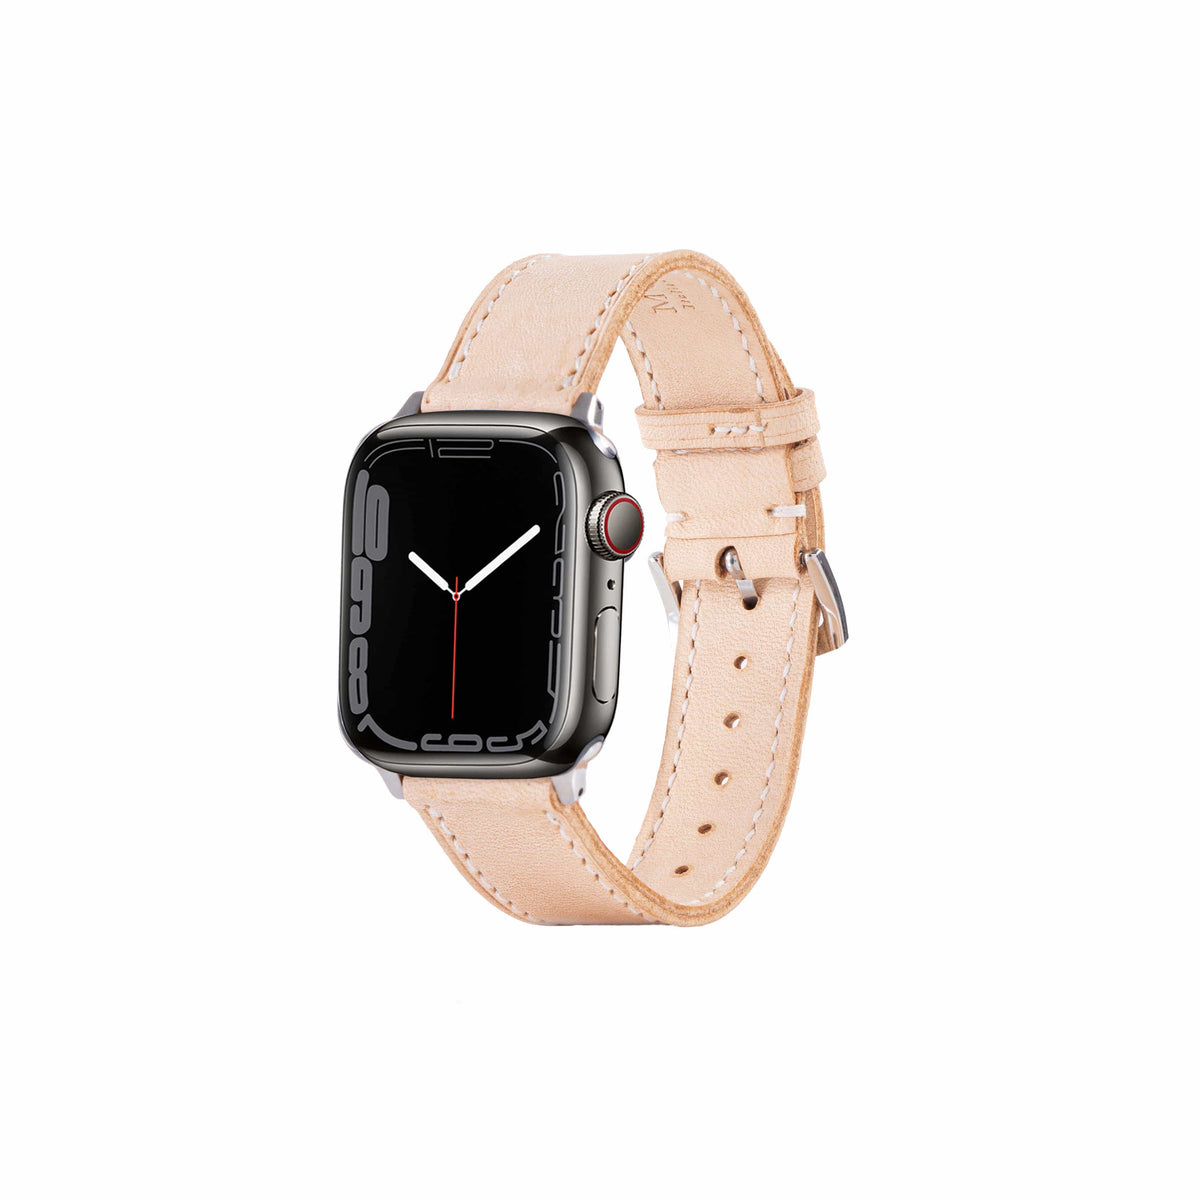 High Quality Apple Watch Leather, Leather Sports Strap